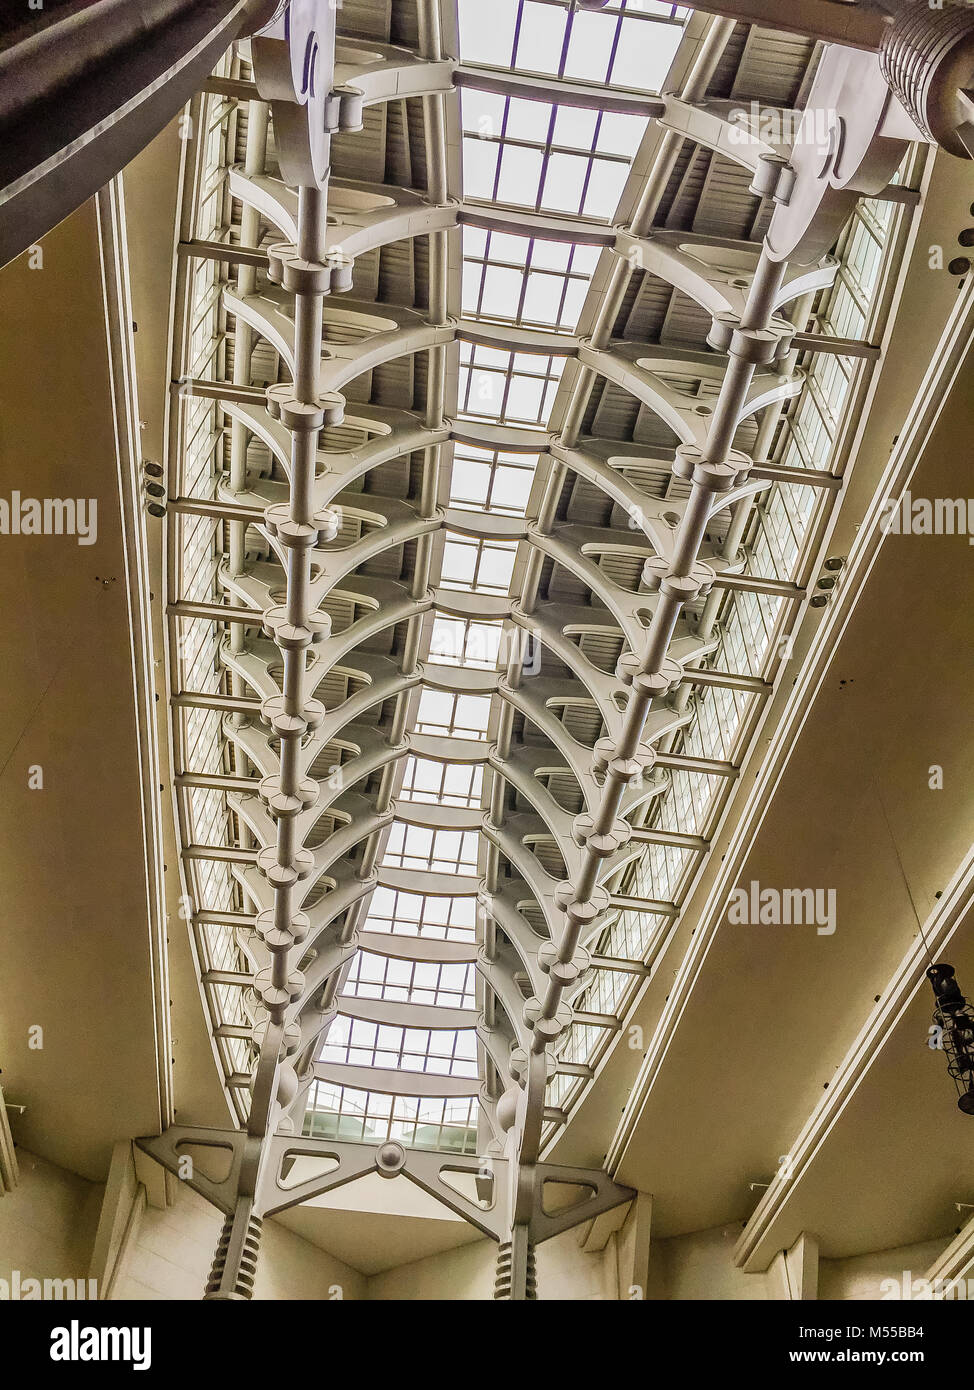 Taipei, Taiwan - November 22, 2015: Taipei 101 tower, view of the interior and structure inside the tower. Stock Photo